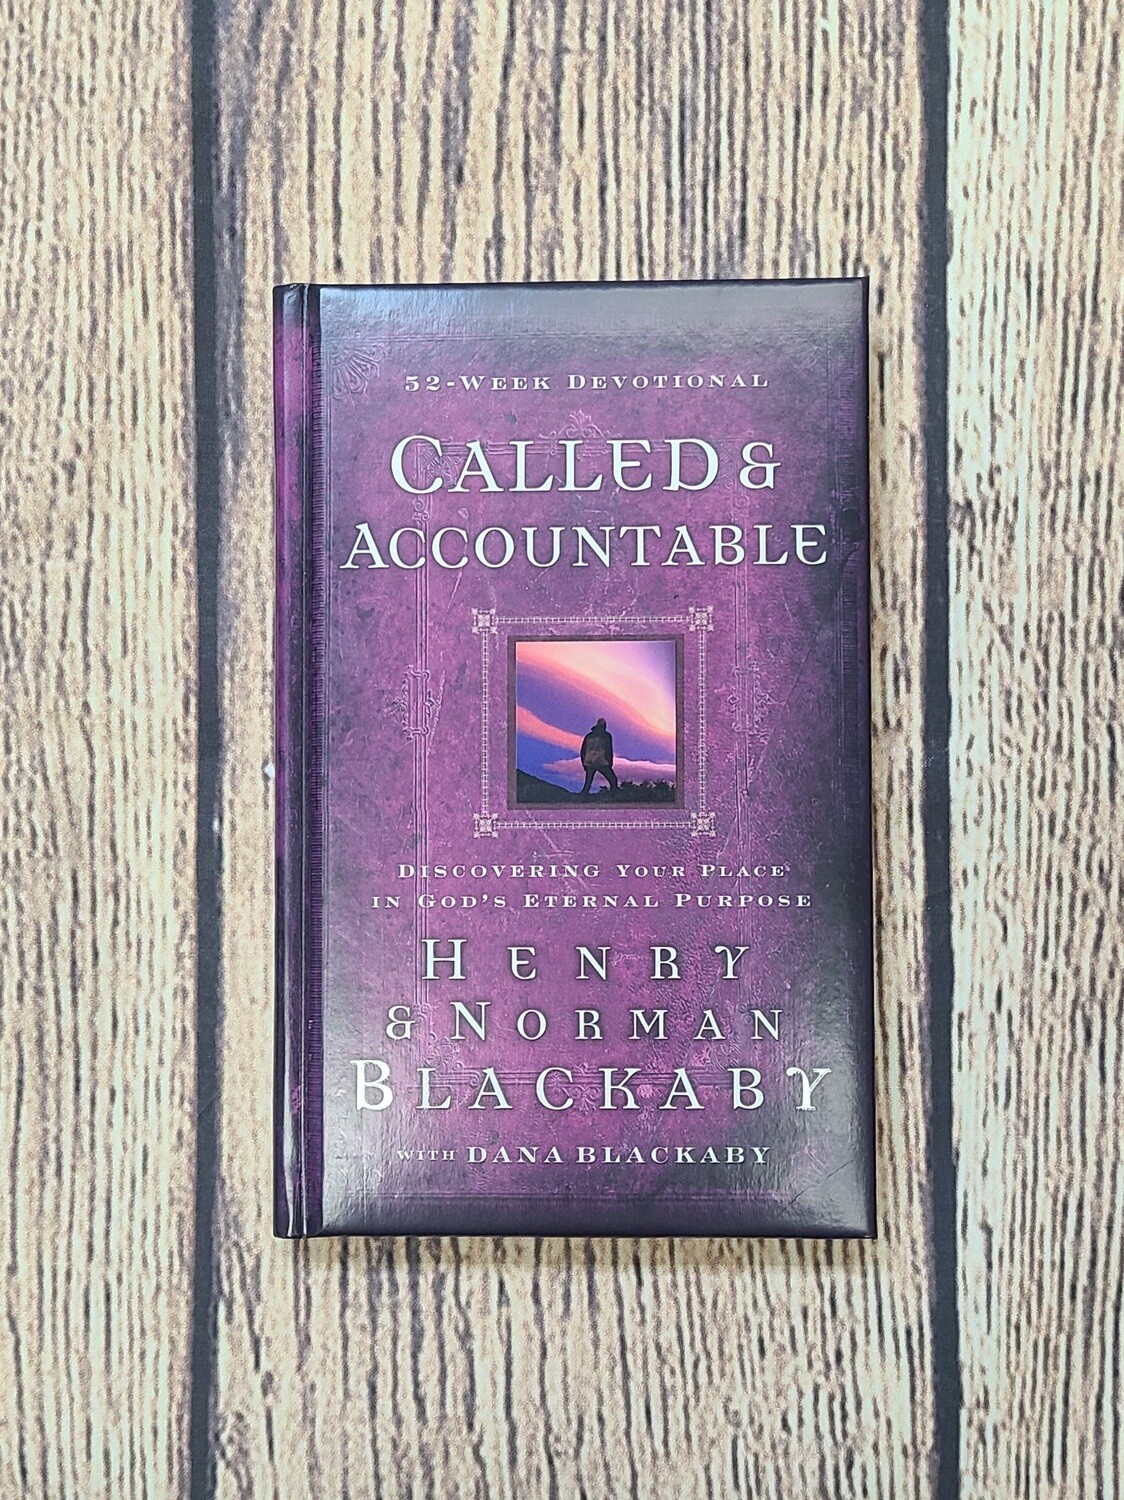 Called and Accountable: 52-Week Devotional by Henry and Norman Blackaby